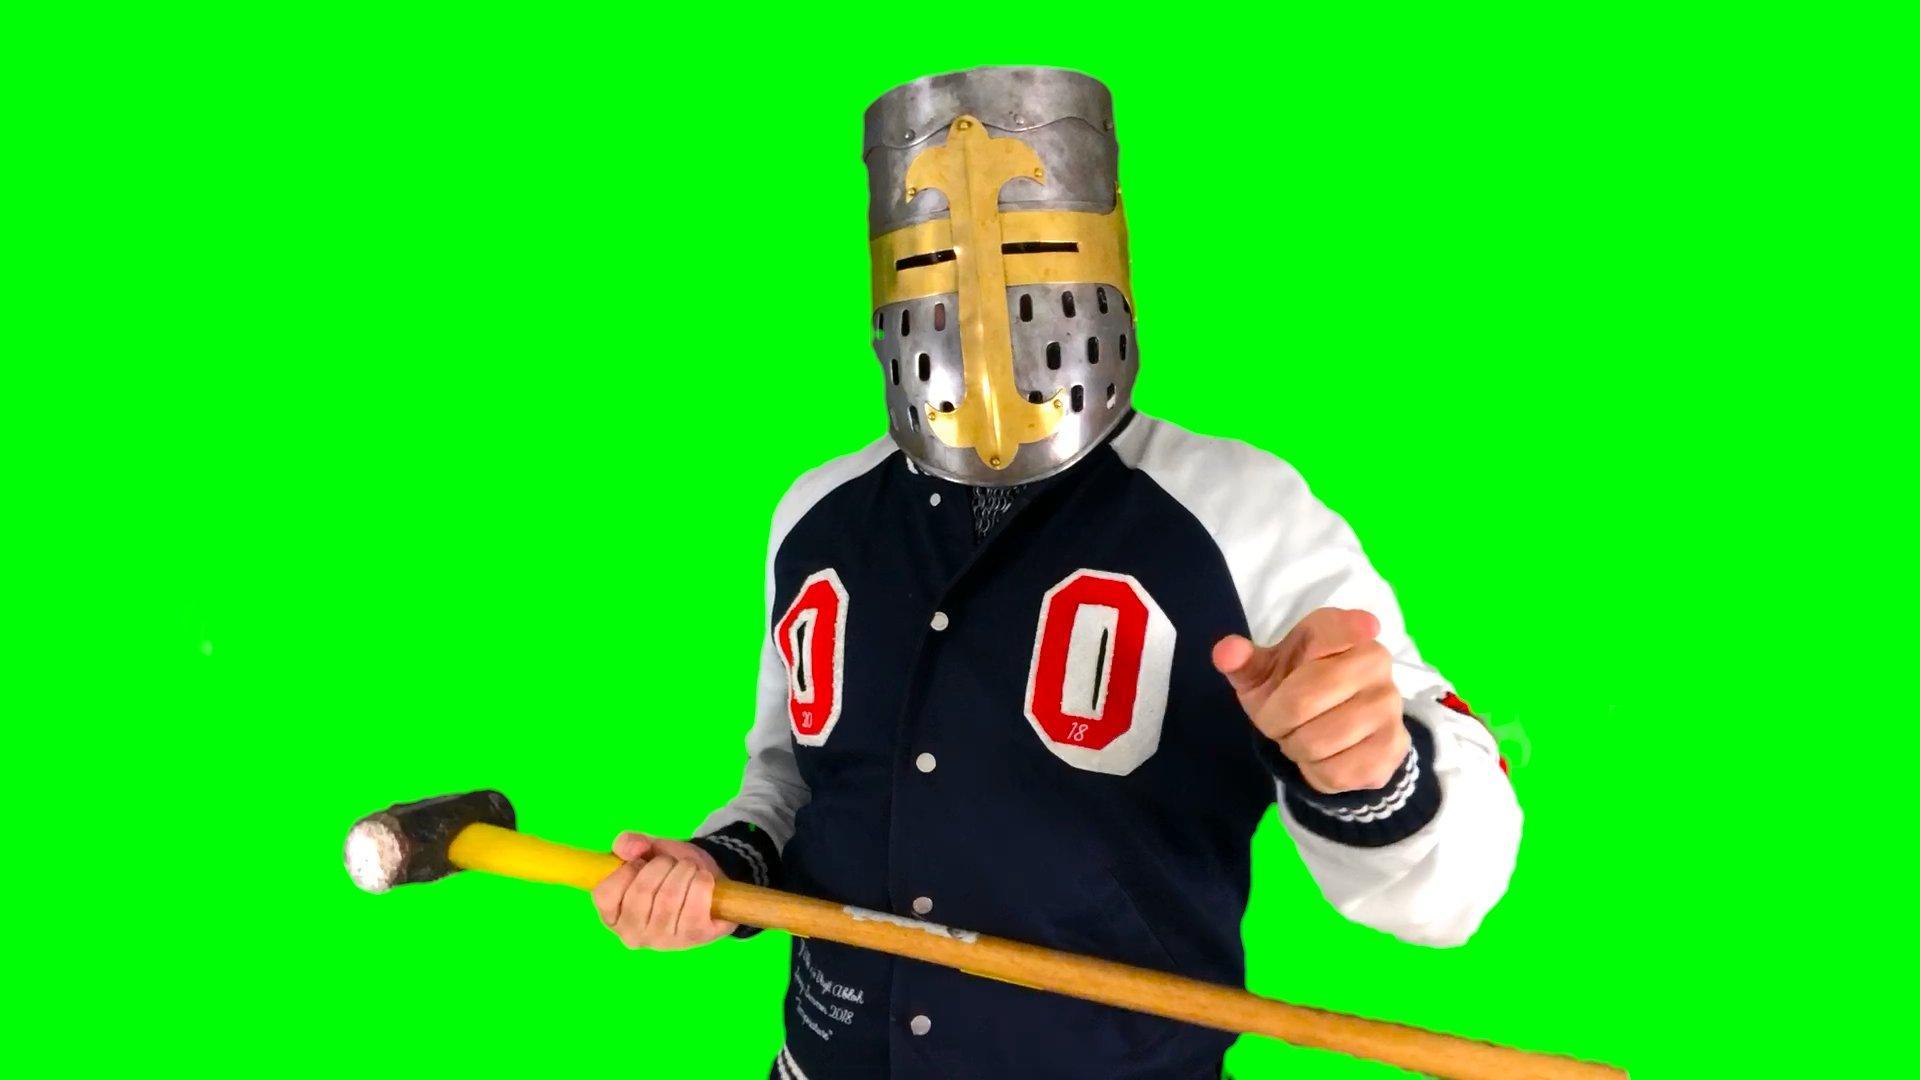 Twitter/SwaggerSouls